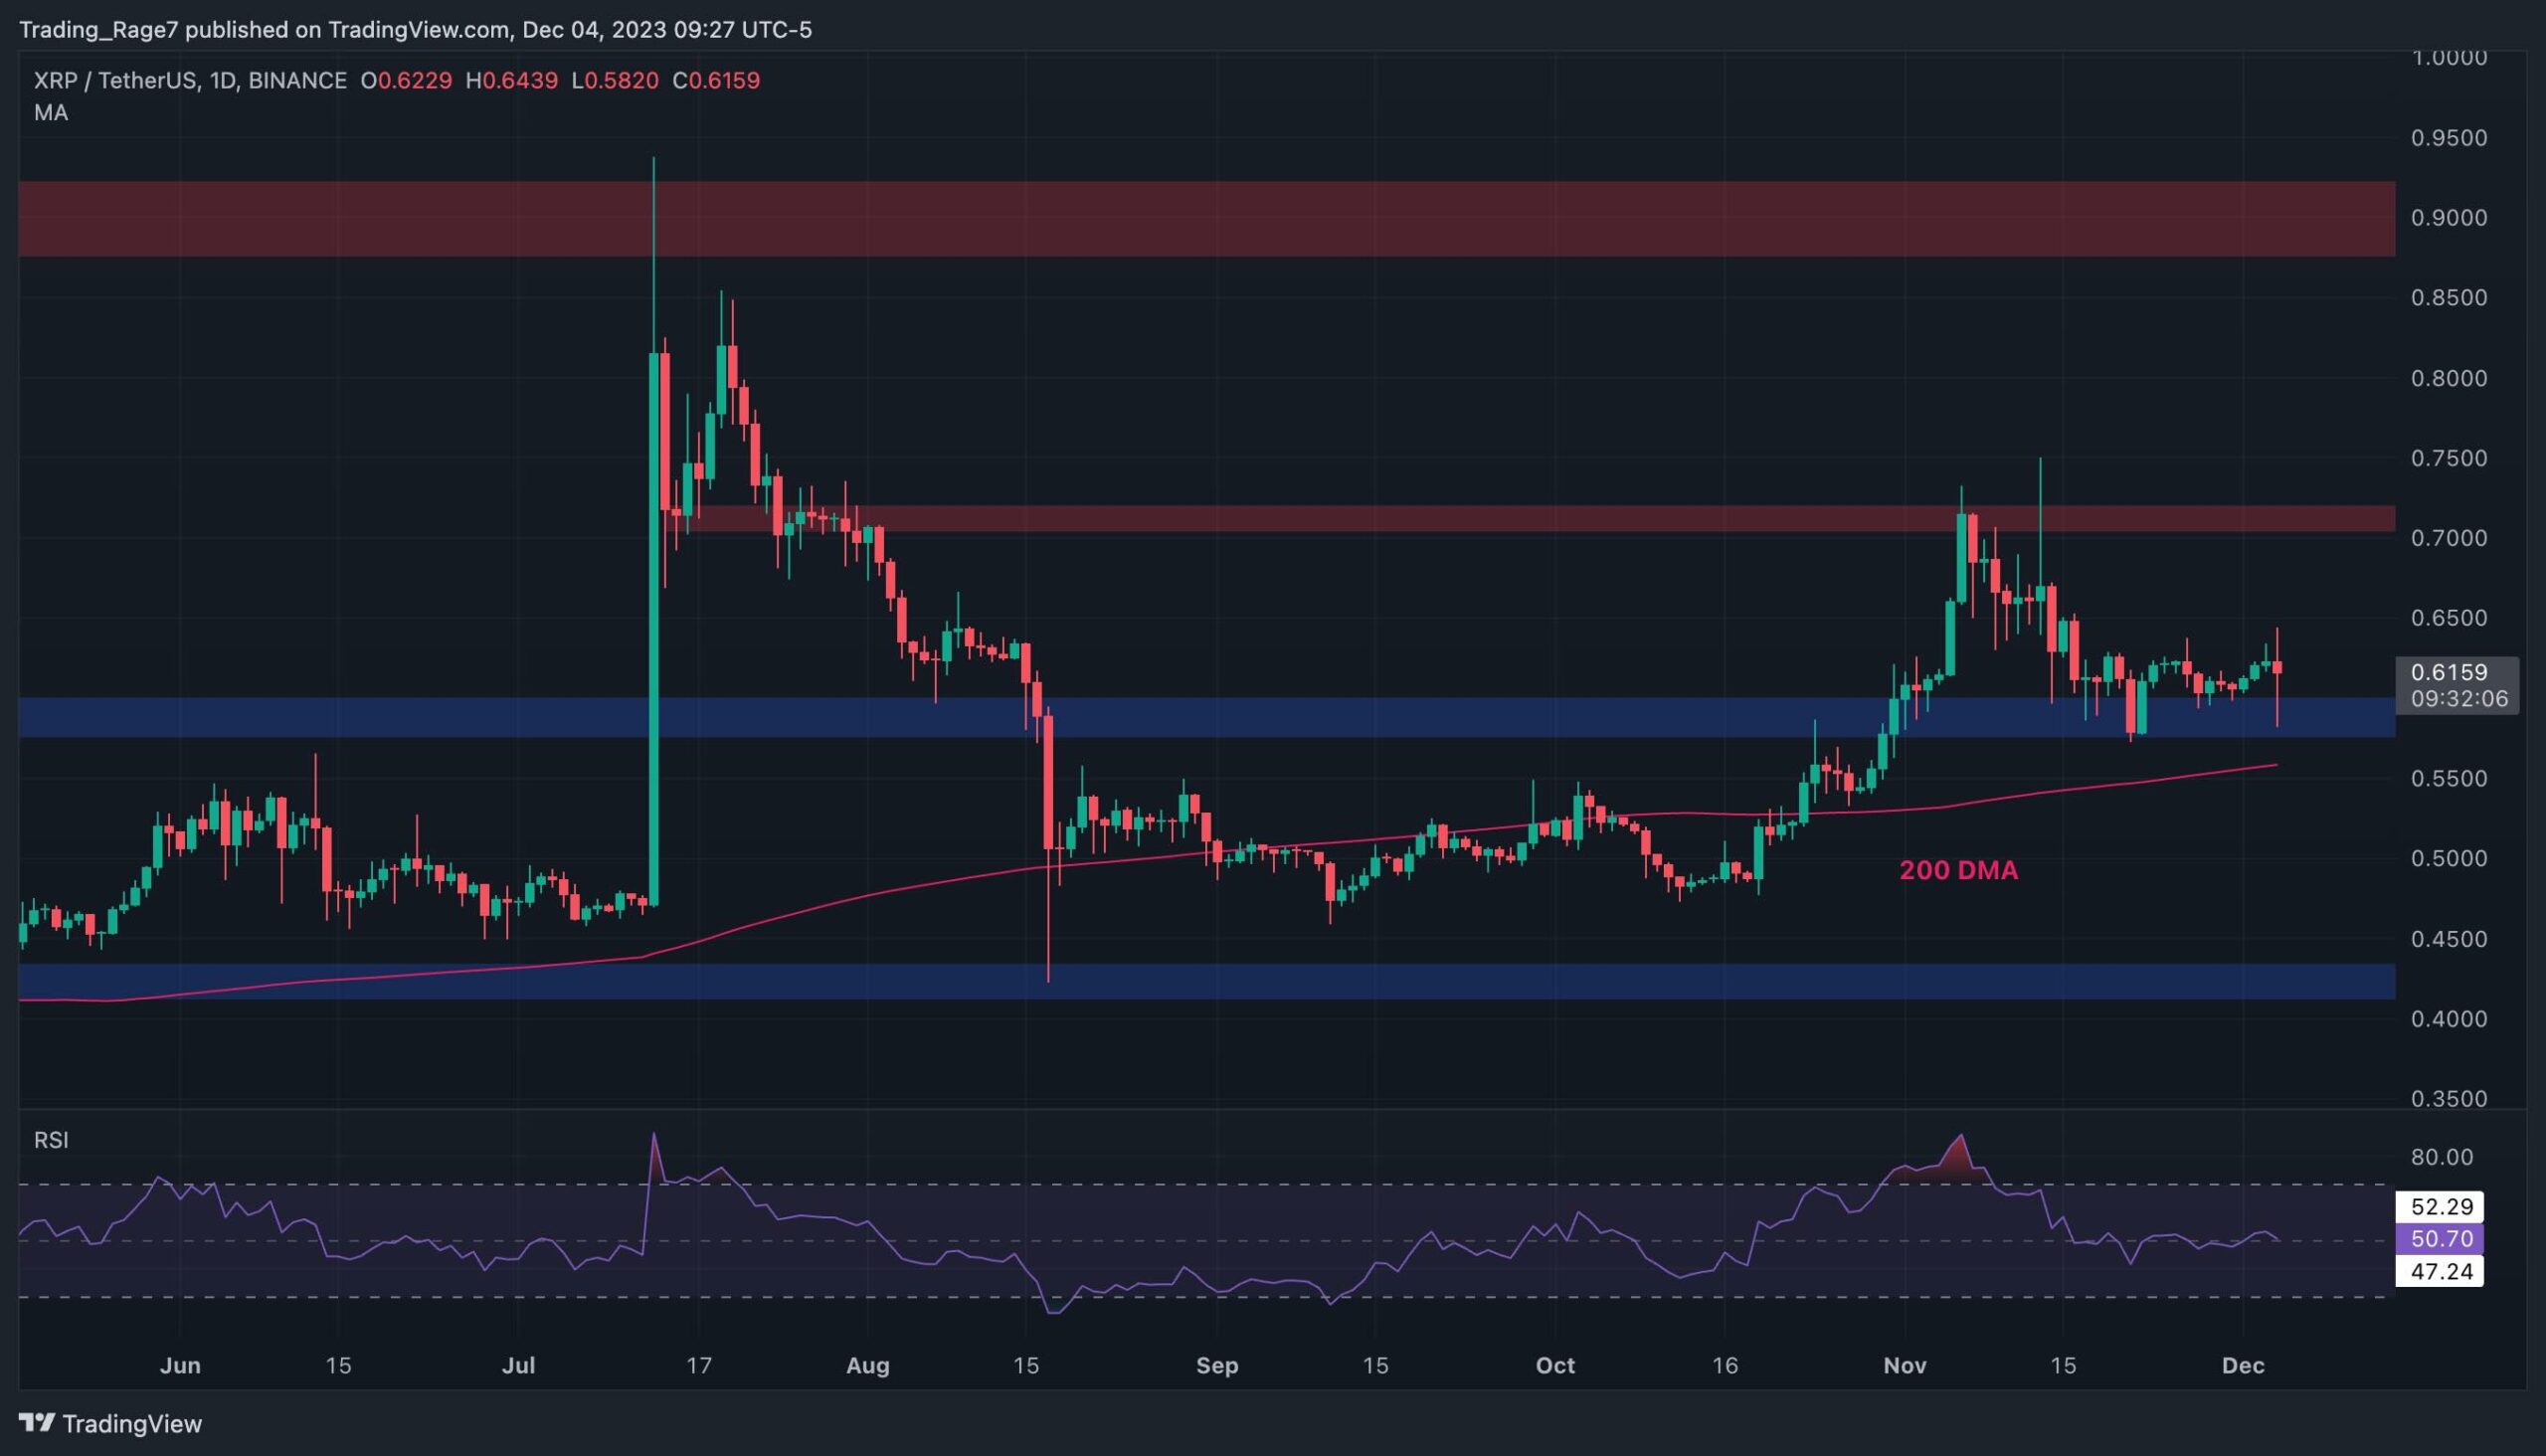 Is XRP About to Explode Like Bitcoin or is a Correction Coming? (Ripple Price Analysis)